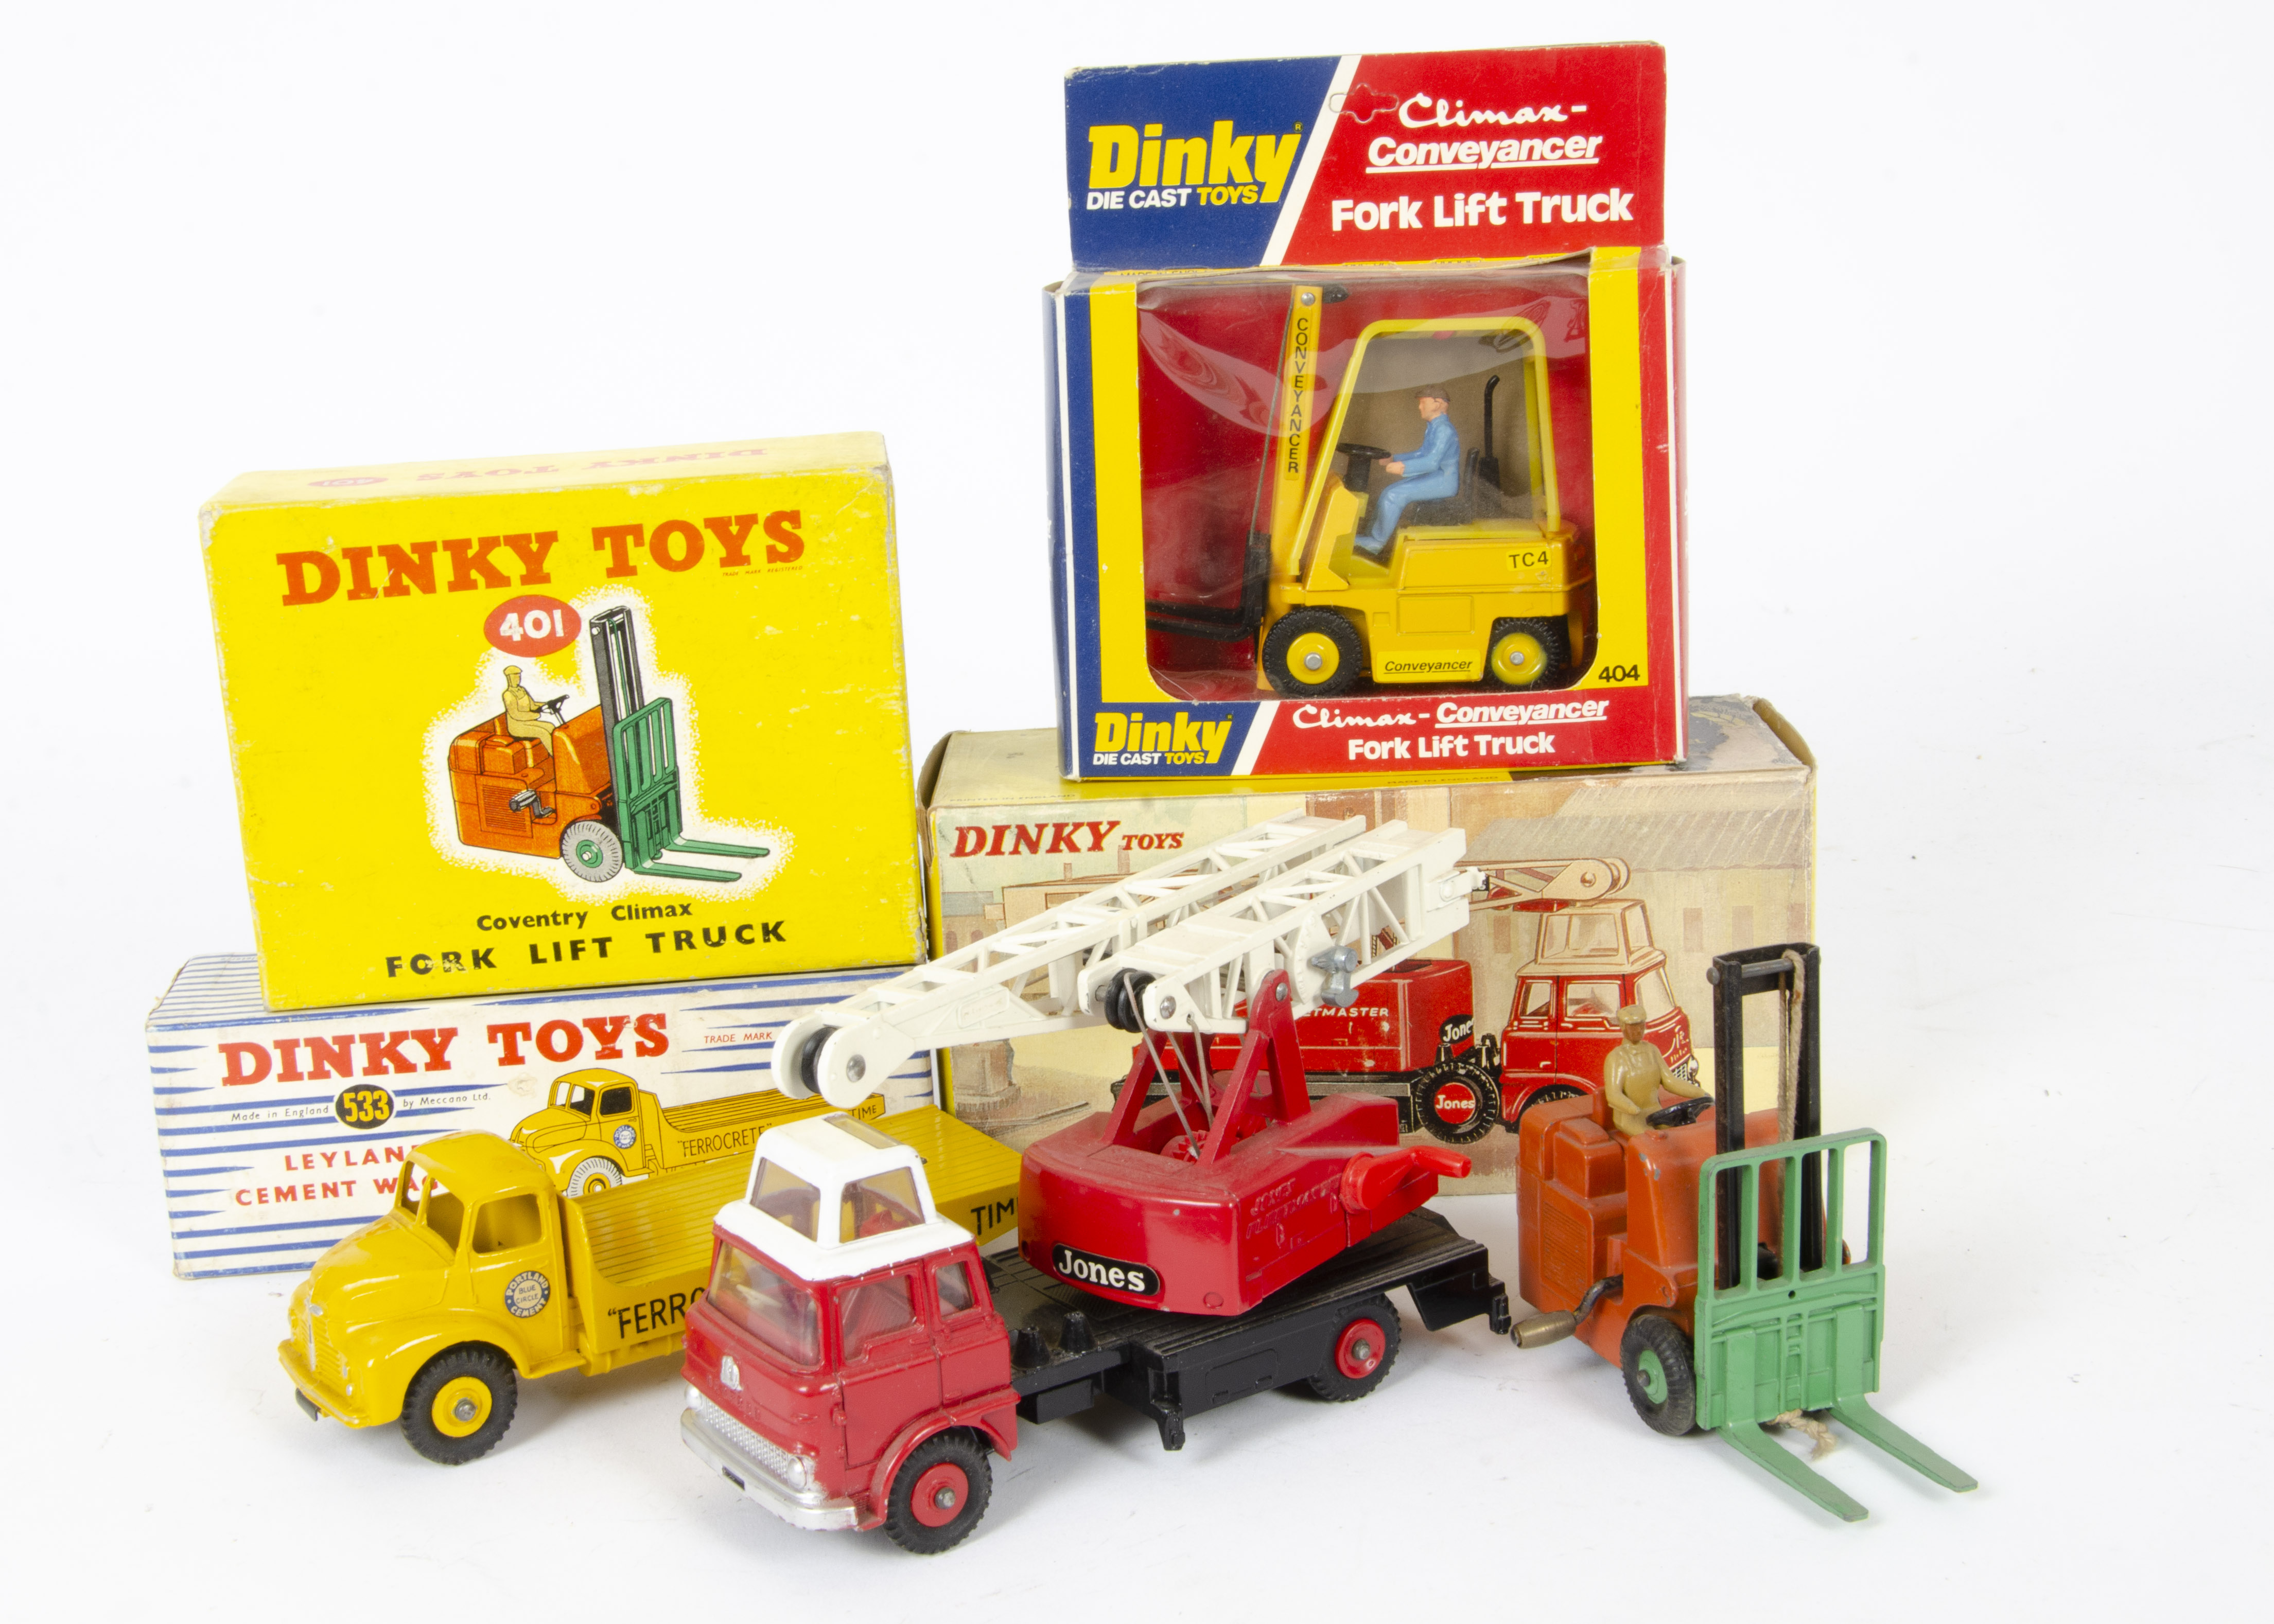 Dinky Toys 970 Jones Fleetmaster Cantilever Crane, 533 Leyland Cement Wagon, 401 and 404 Coventry